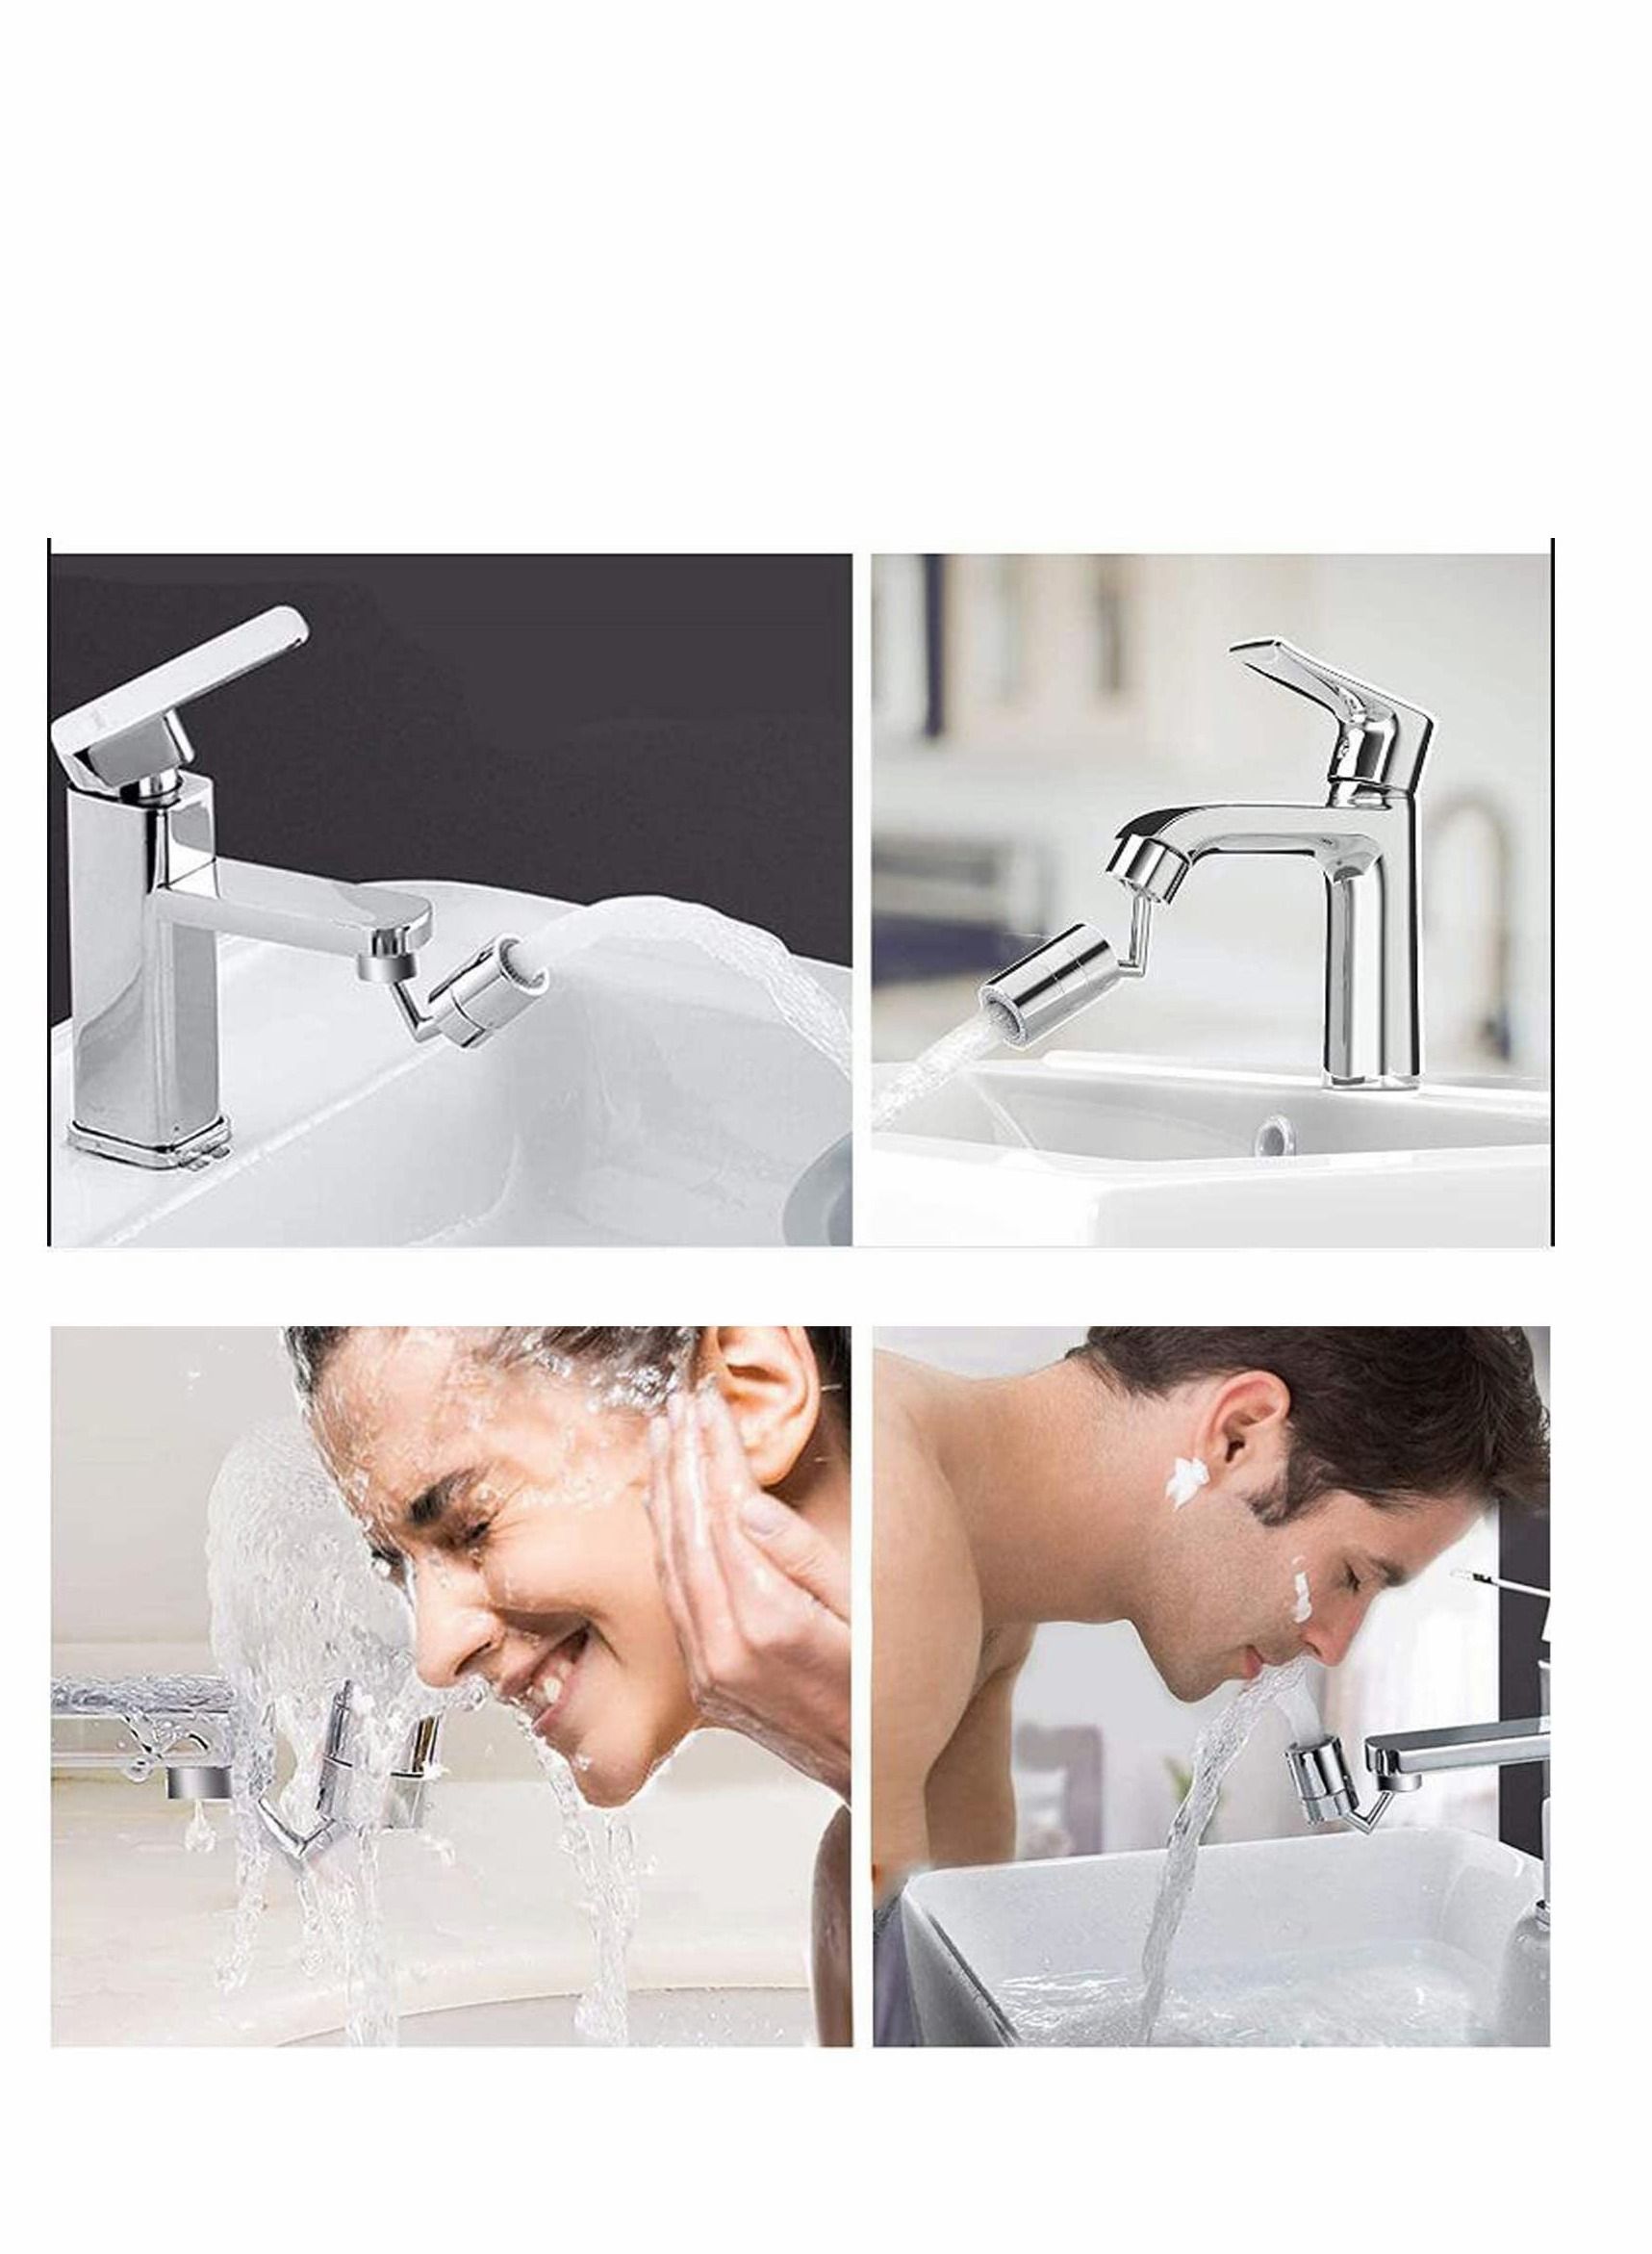 720 ° Faucet Aerator Big Angle Spray Large Flow Dual Function Kitchen Aerator, Bathroom Mounted for Face Washing, Gargle and Eye Flush 